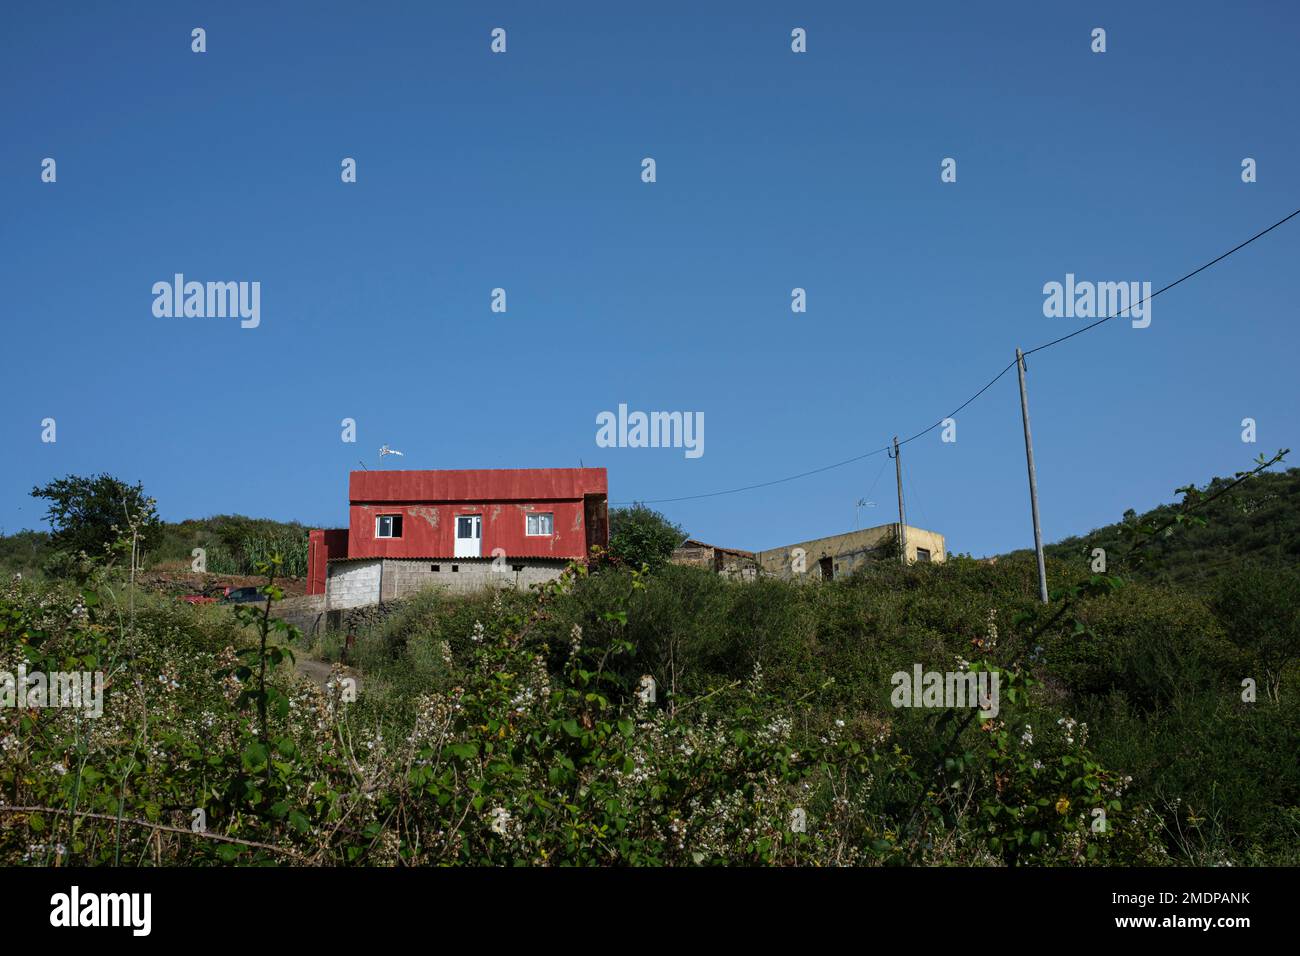 Rustic red painted rural farmhouse against a blue sky in Erjos, Tenerife, Canary Islands, Spain Stock Photo